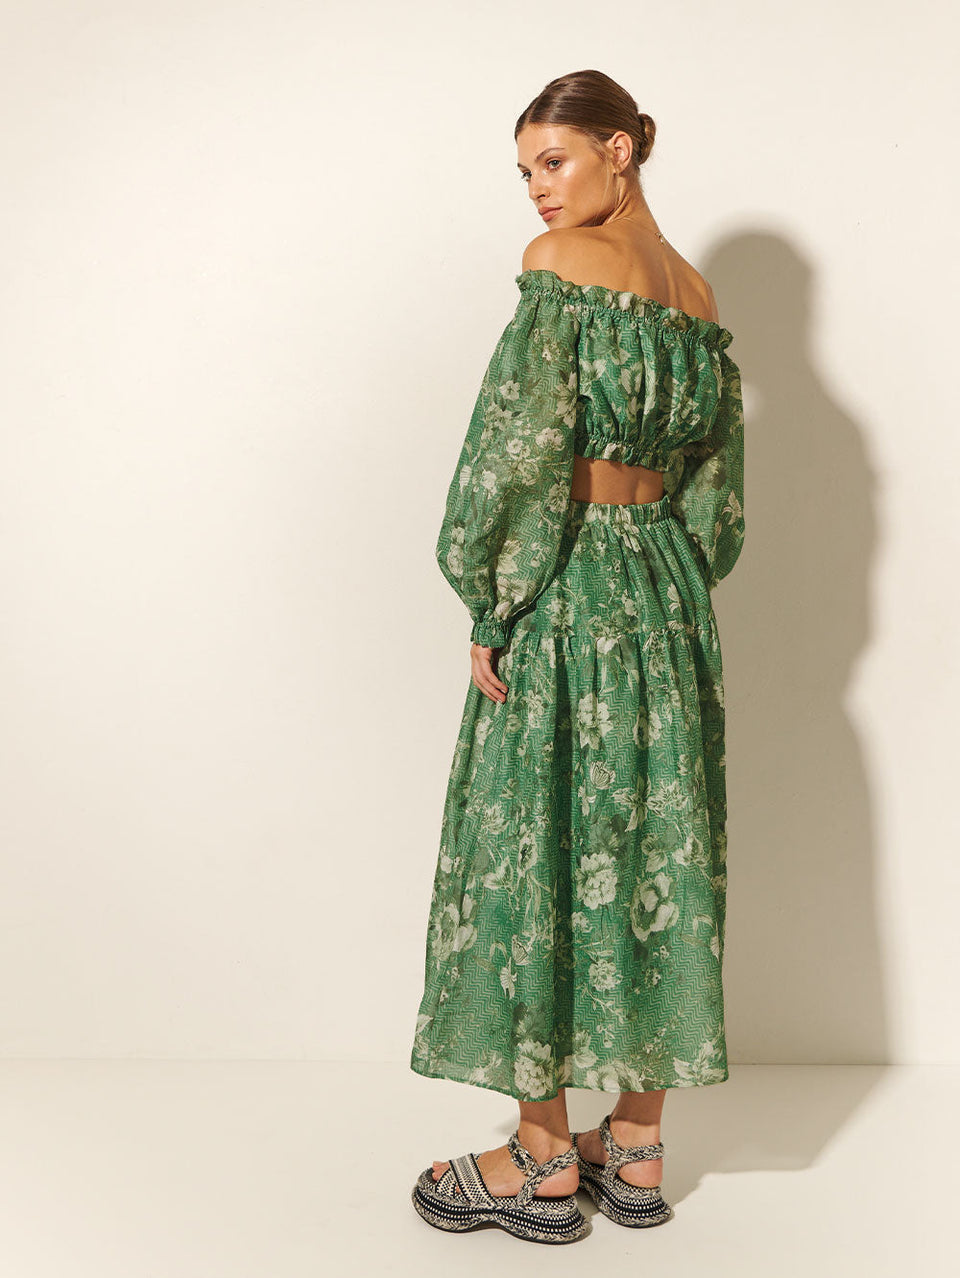 Studio model wears KIVARI Khalo Midi Skirt: A green floral midi skirt featuring an elasticated drawstring waist with gold bead ends and a gathered tiered skirt.